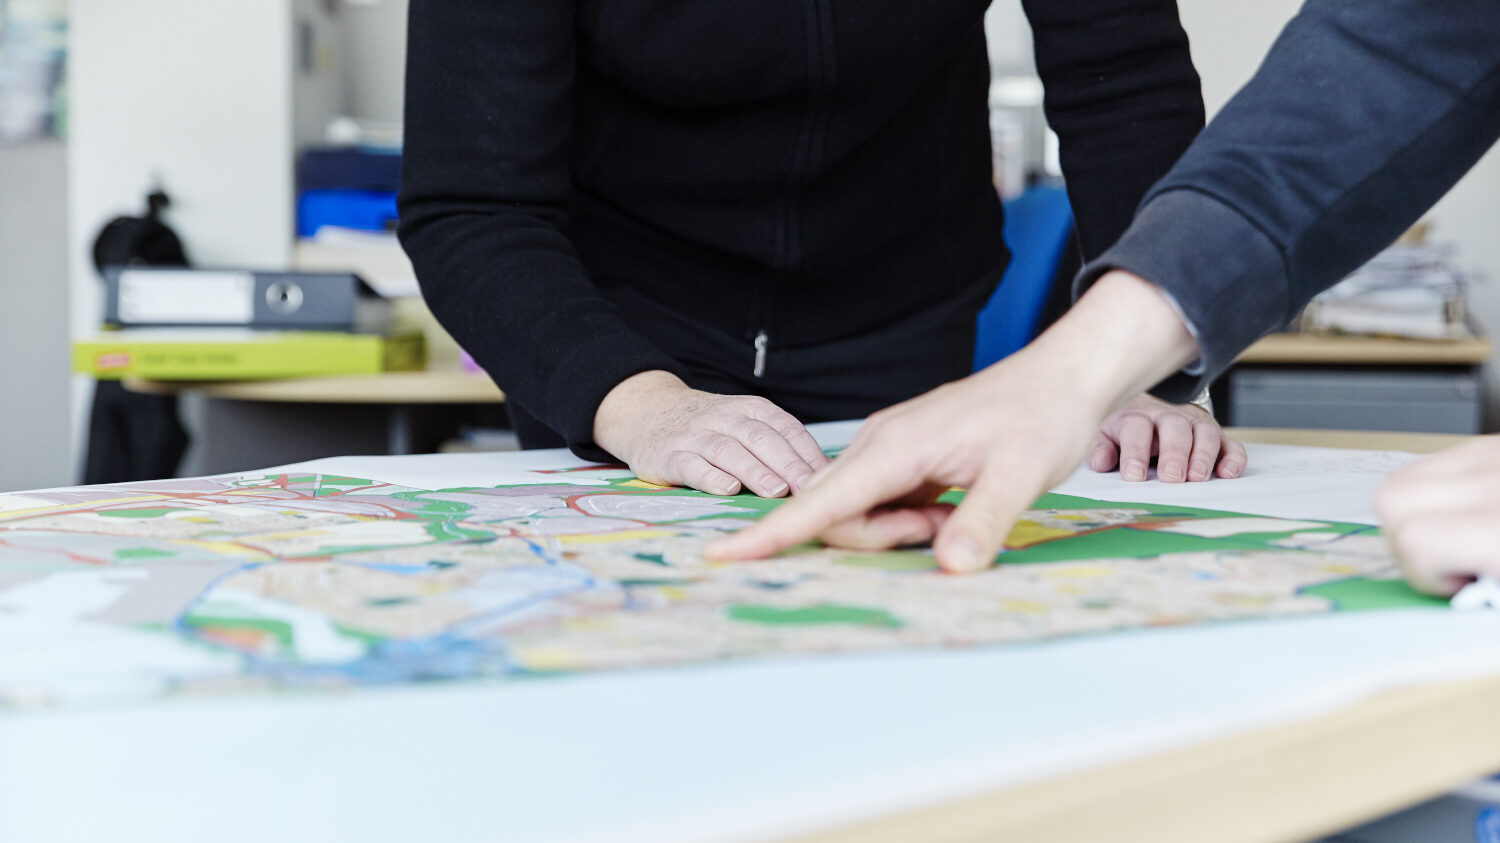 hands pointing on a map resting on a table